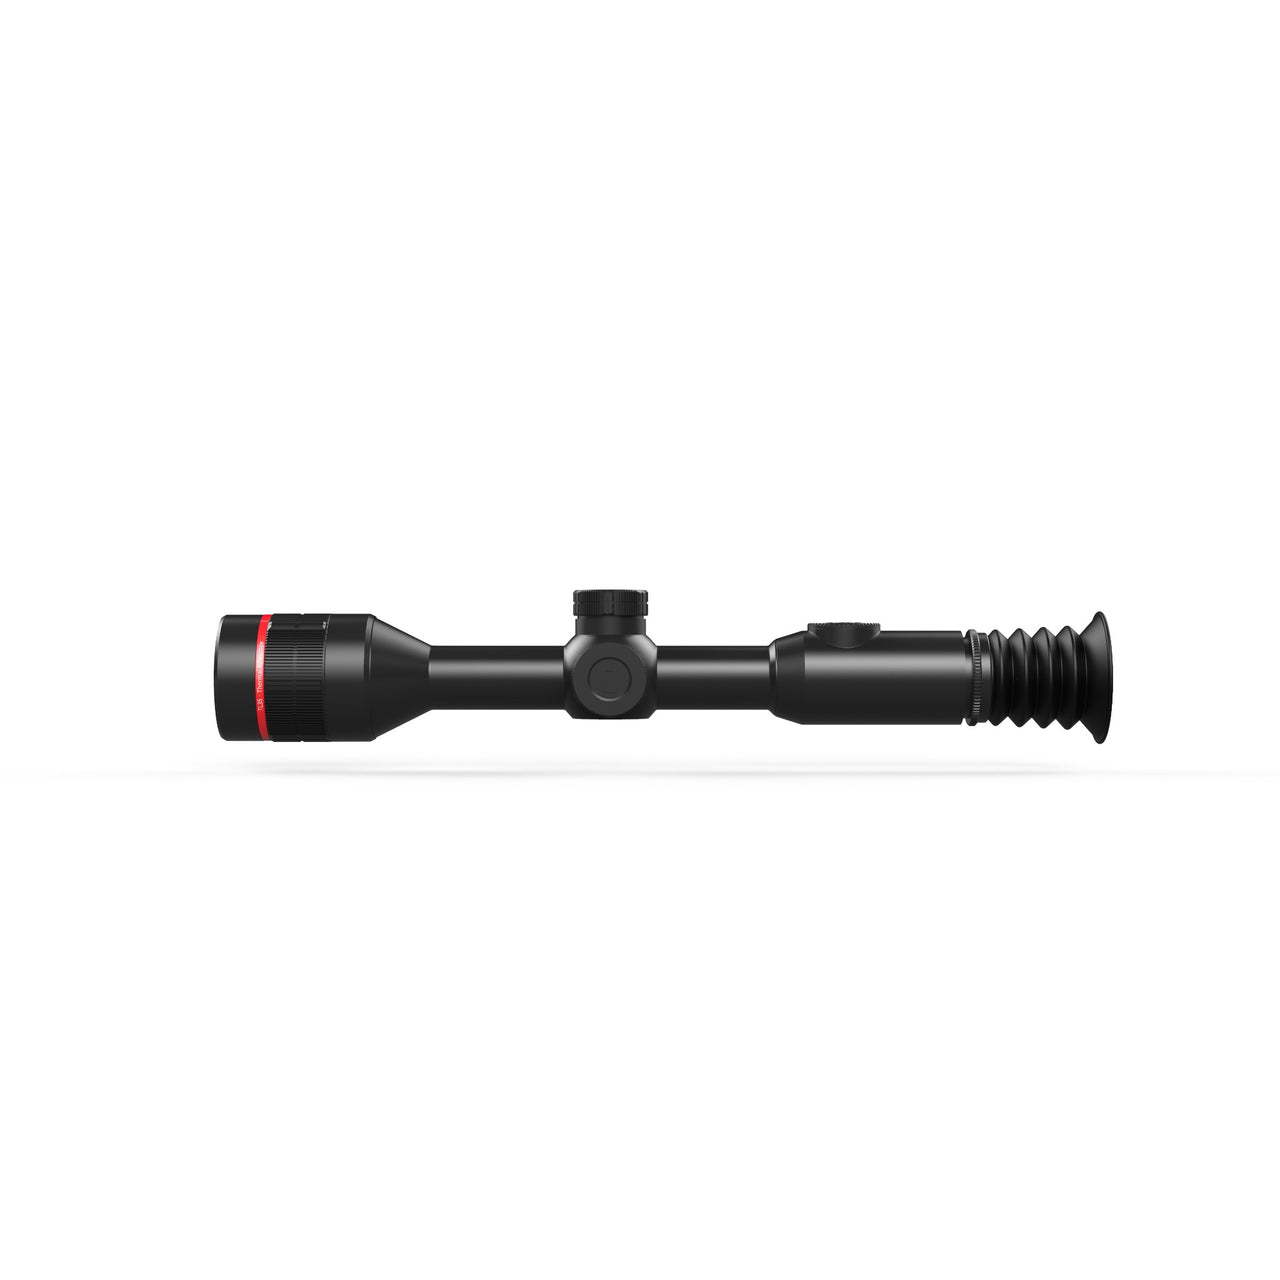 Tube Series Thermal Rifle Scope TL35